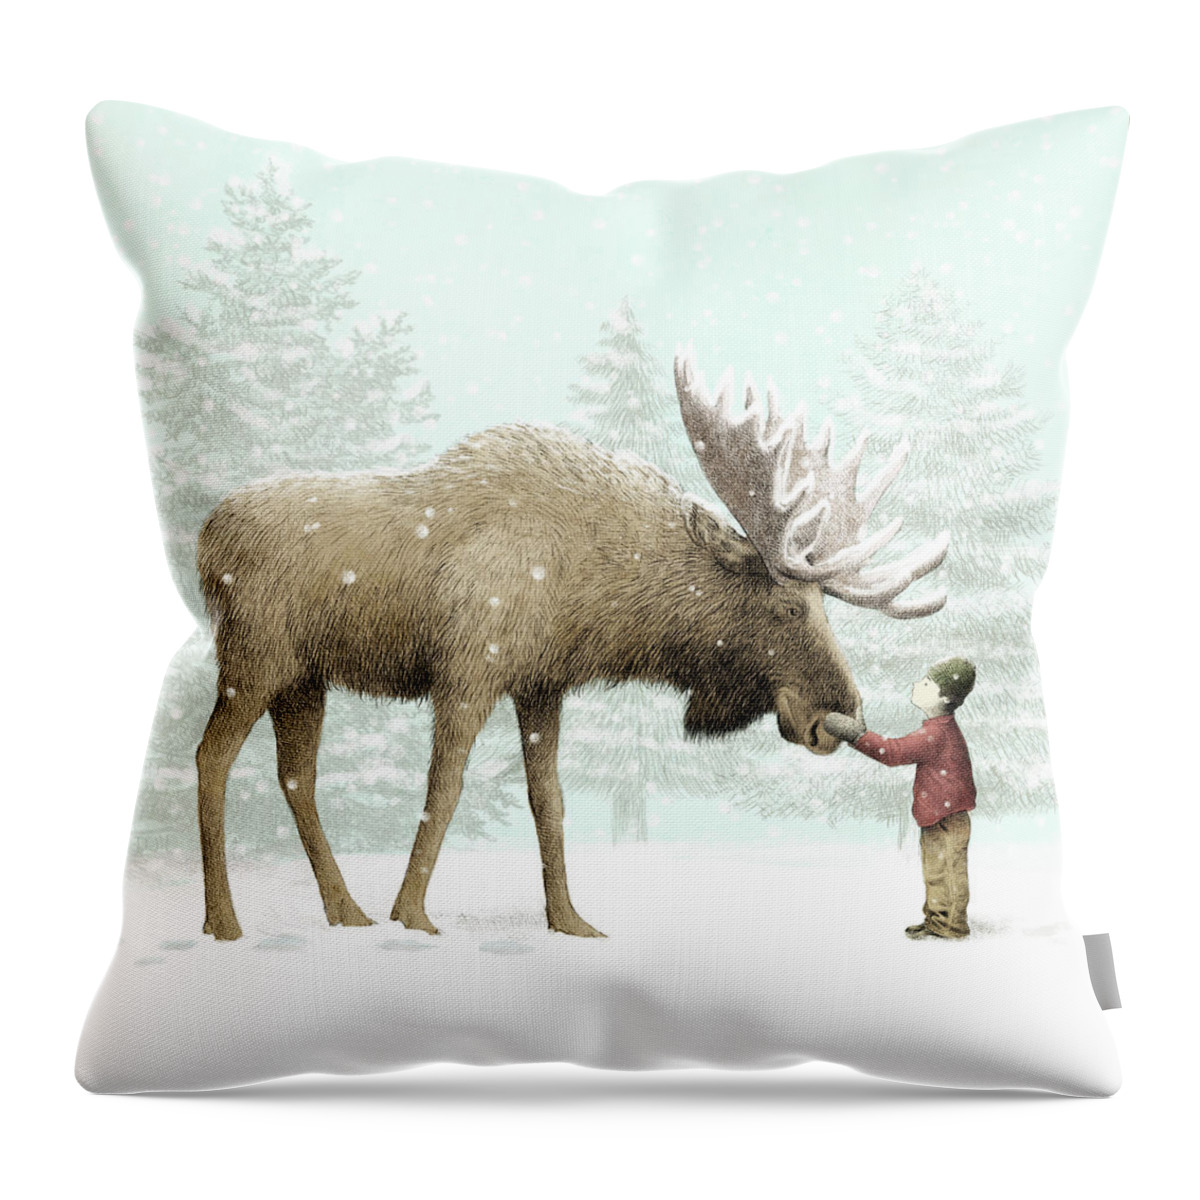 Moose Throw Pillow featuring the drawing Winter Moose by Eric Fan